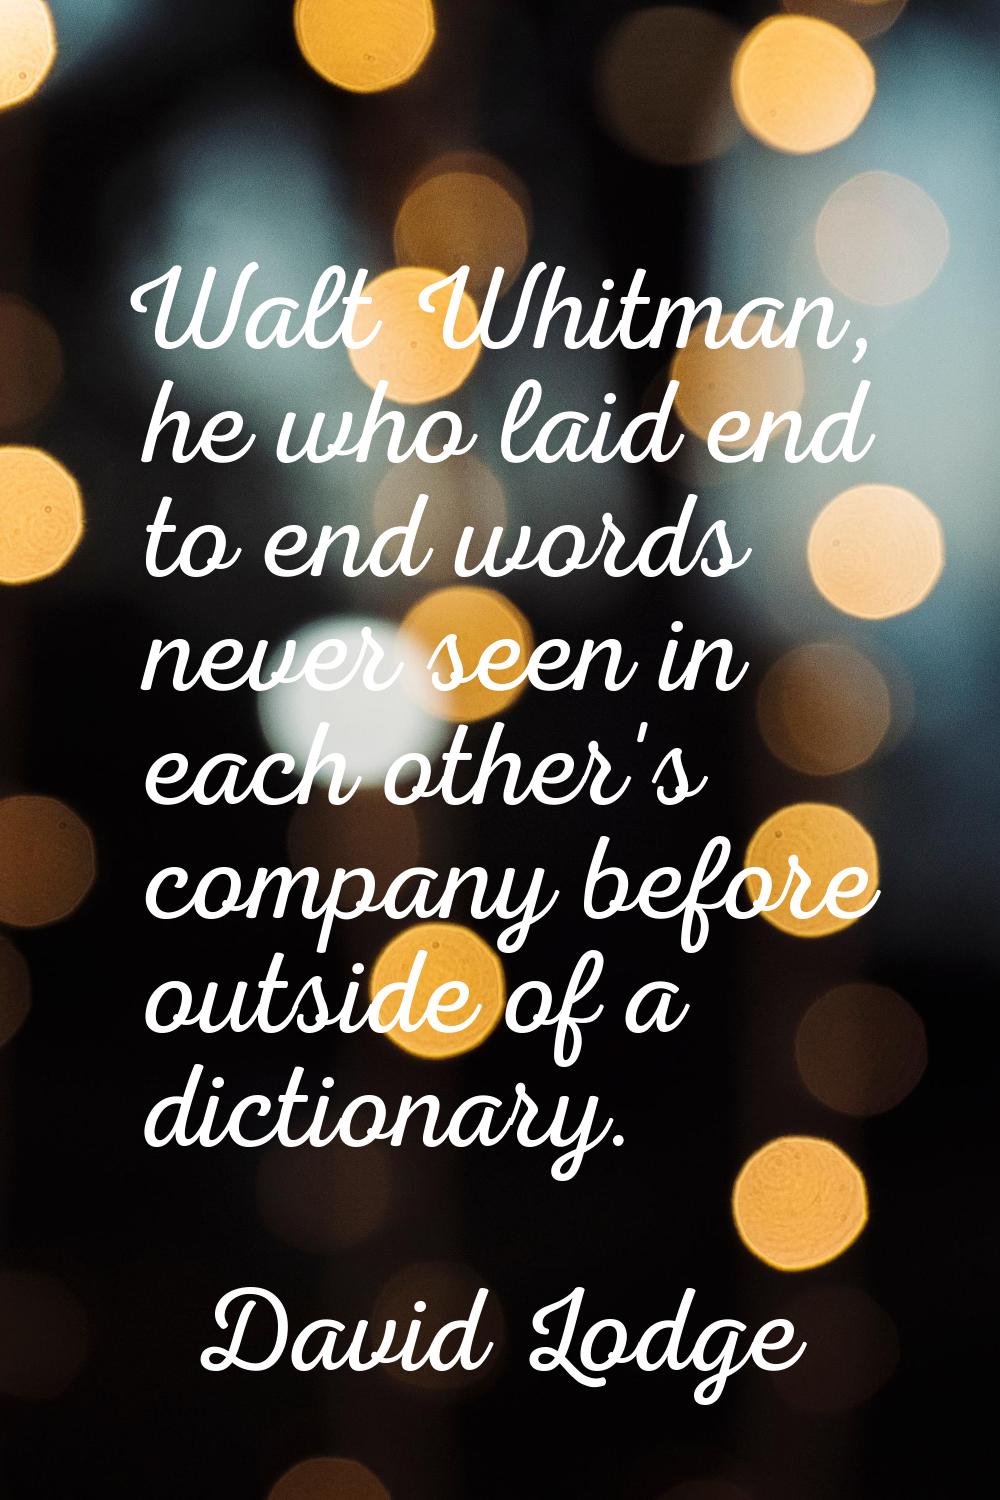 Walt Whitman, he who laid end to end words never seen in each other's company before outside of a d